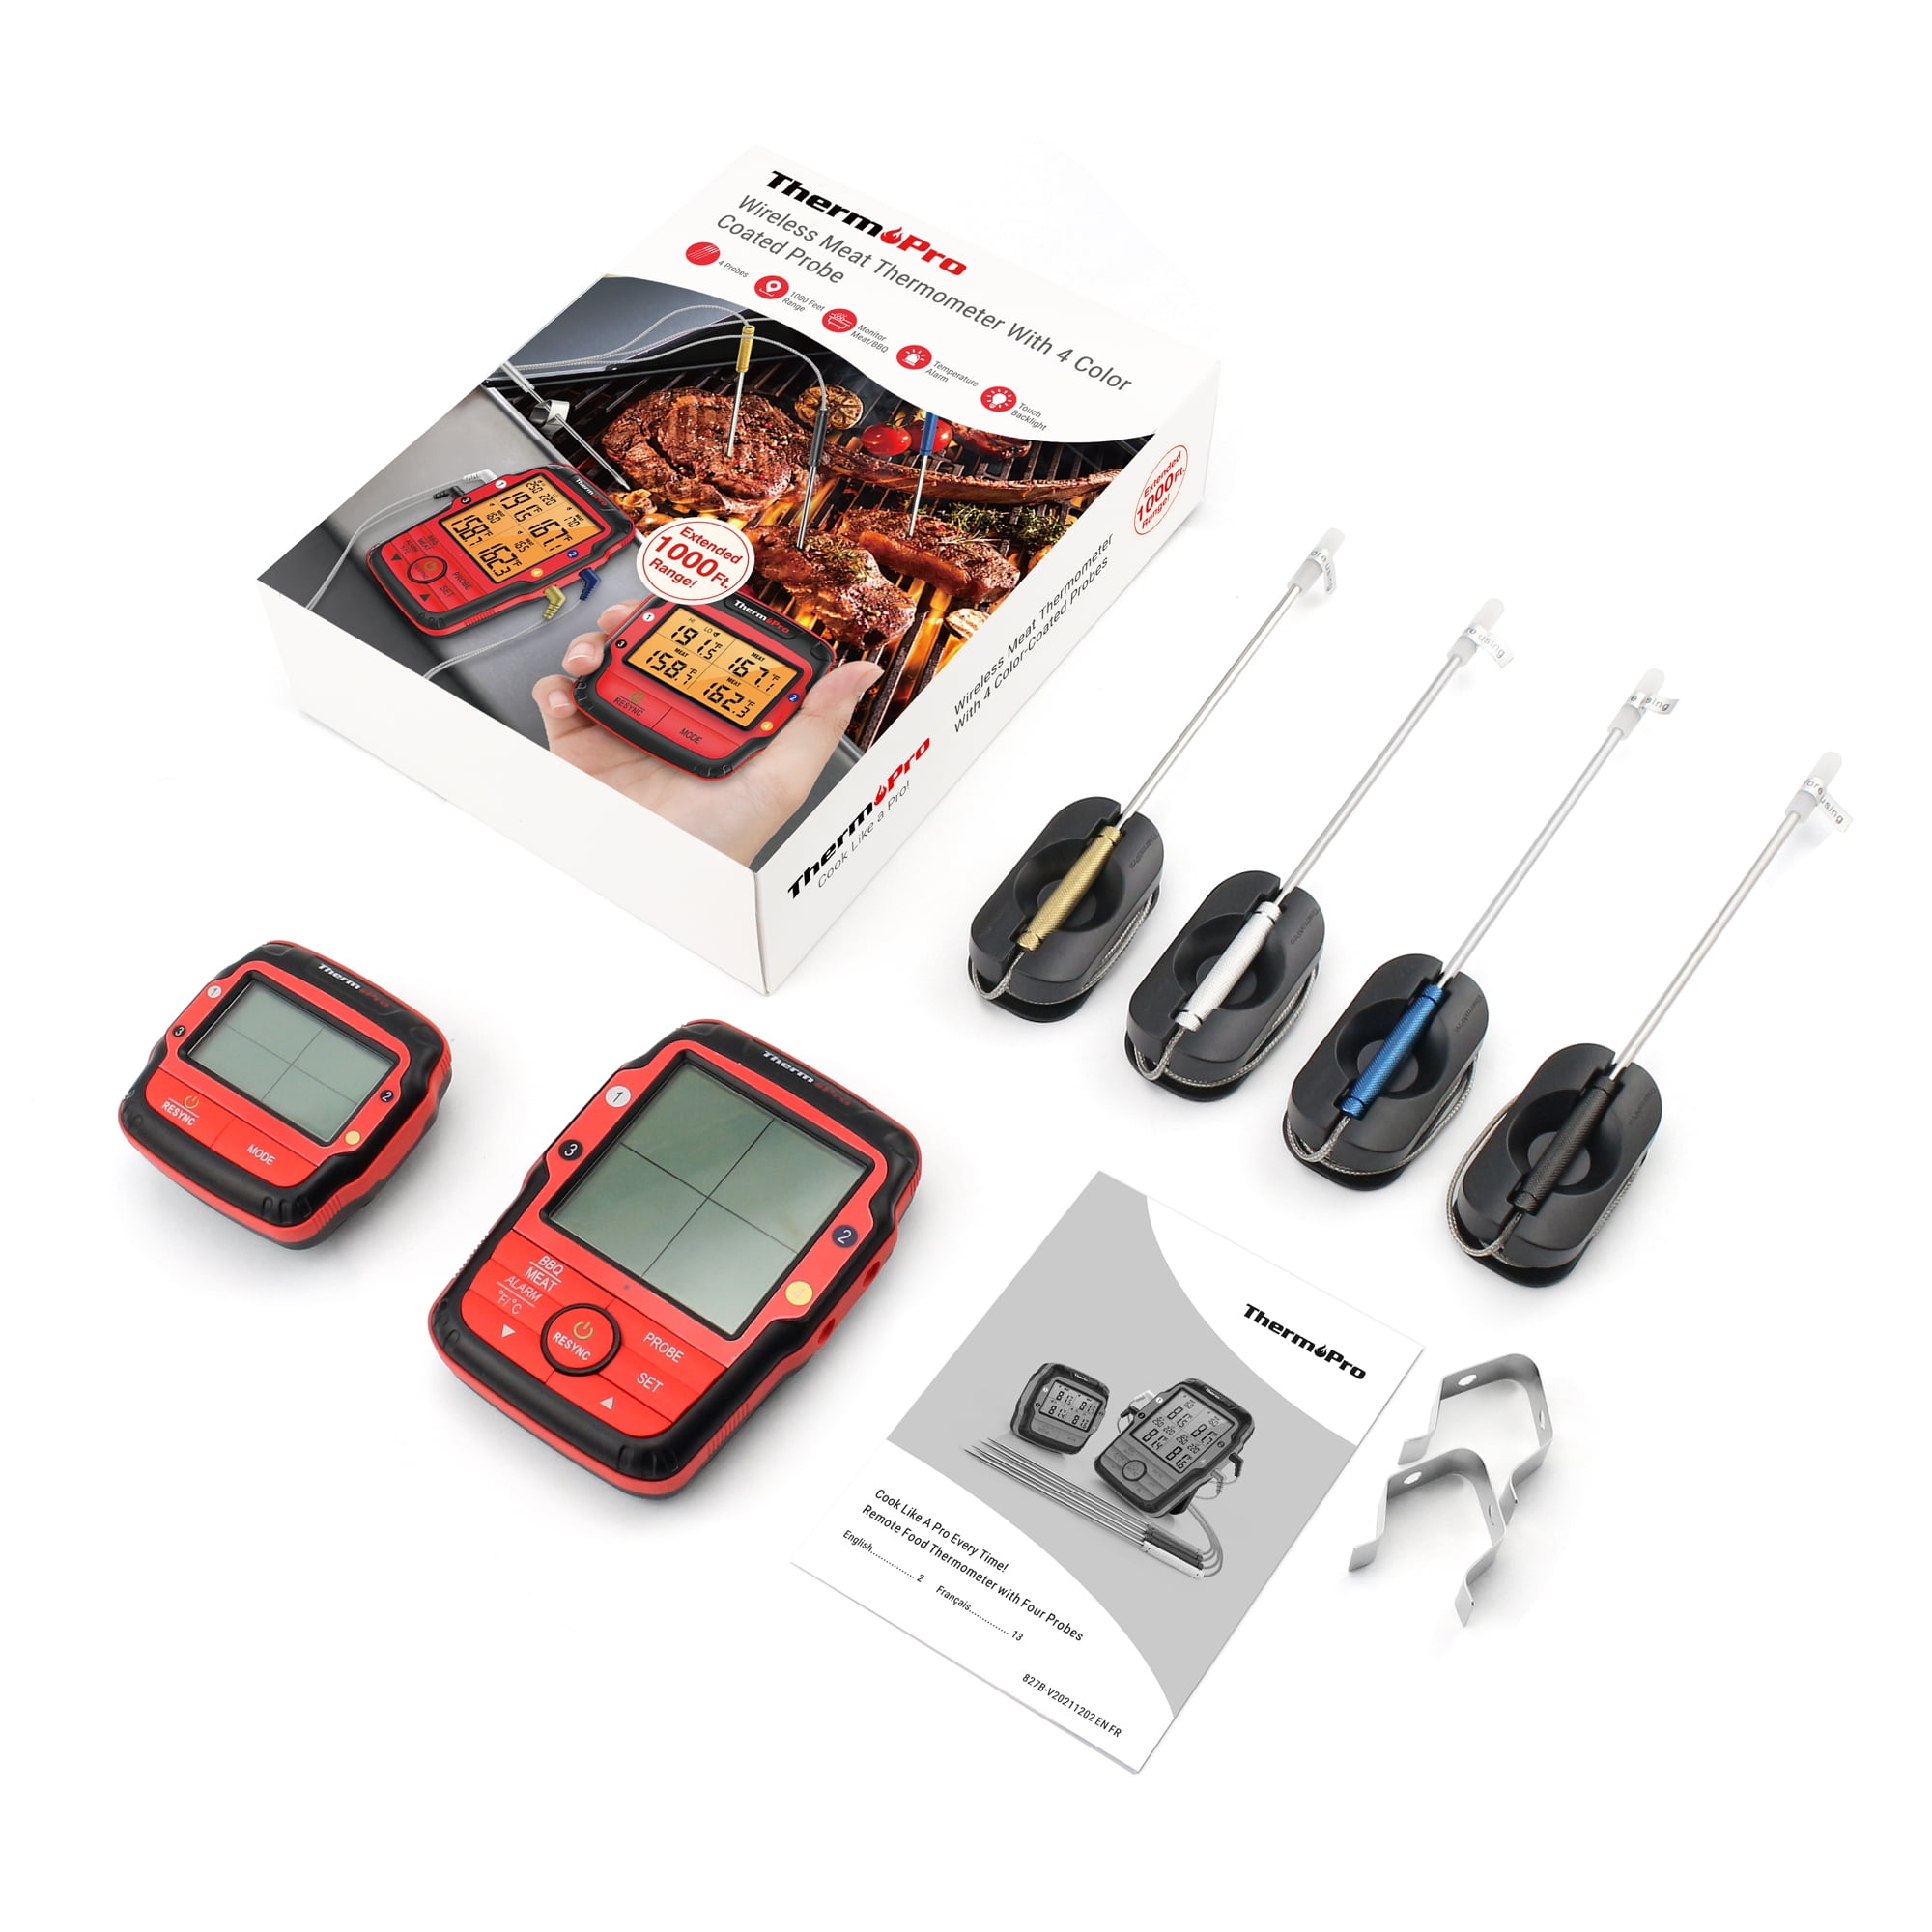 ThermoPro TP27 500FT Long Range Wireless Meat Smoker Thermometer